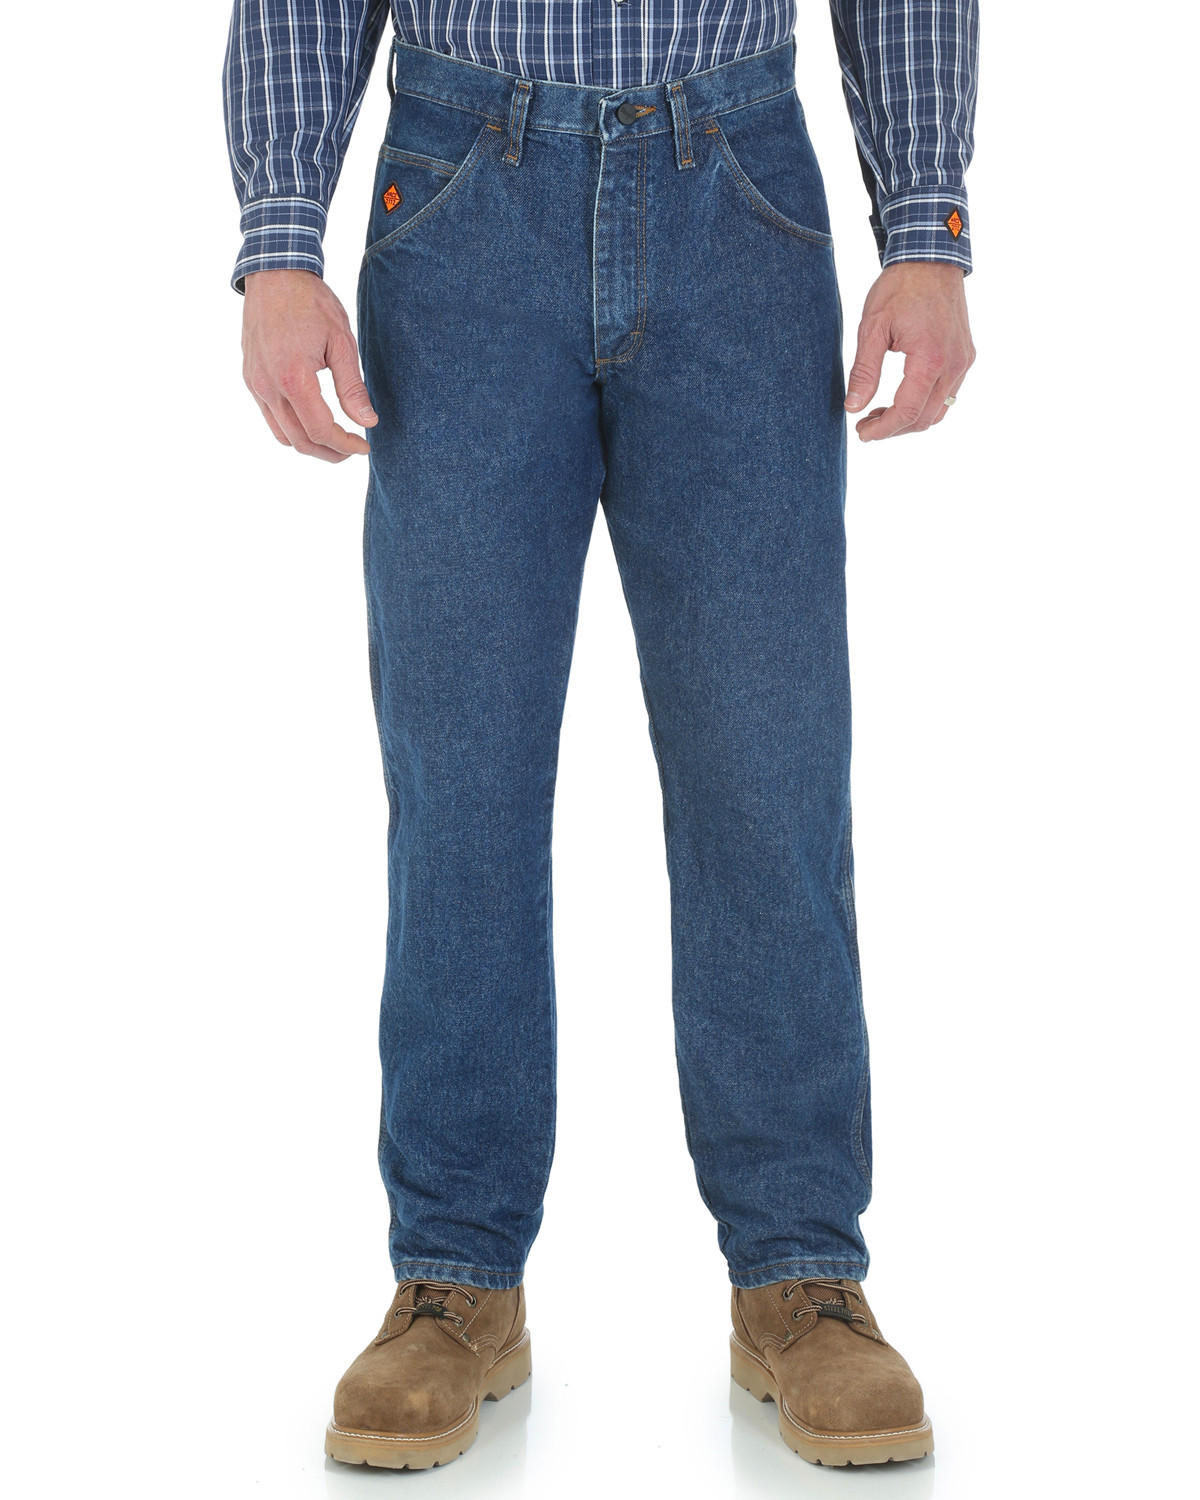 Wrangler Men's Flame Resistant Relaxed Fit Work Jeans | Sheplers